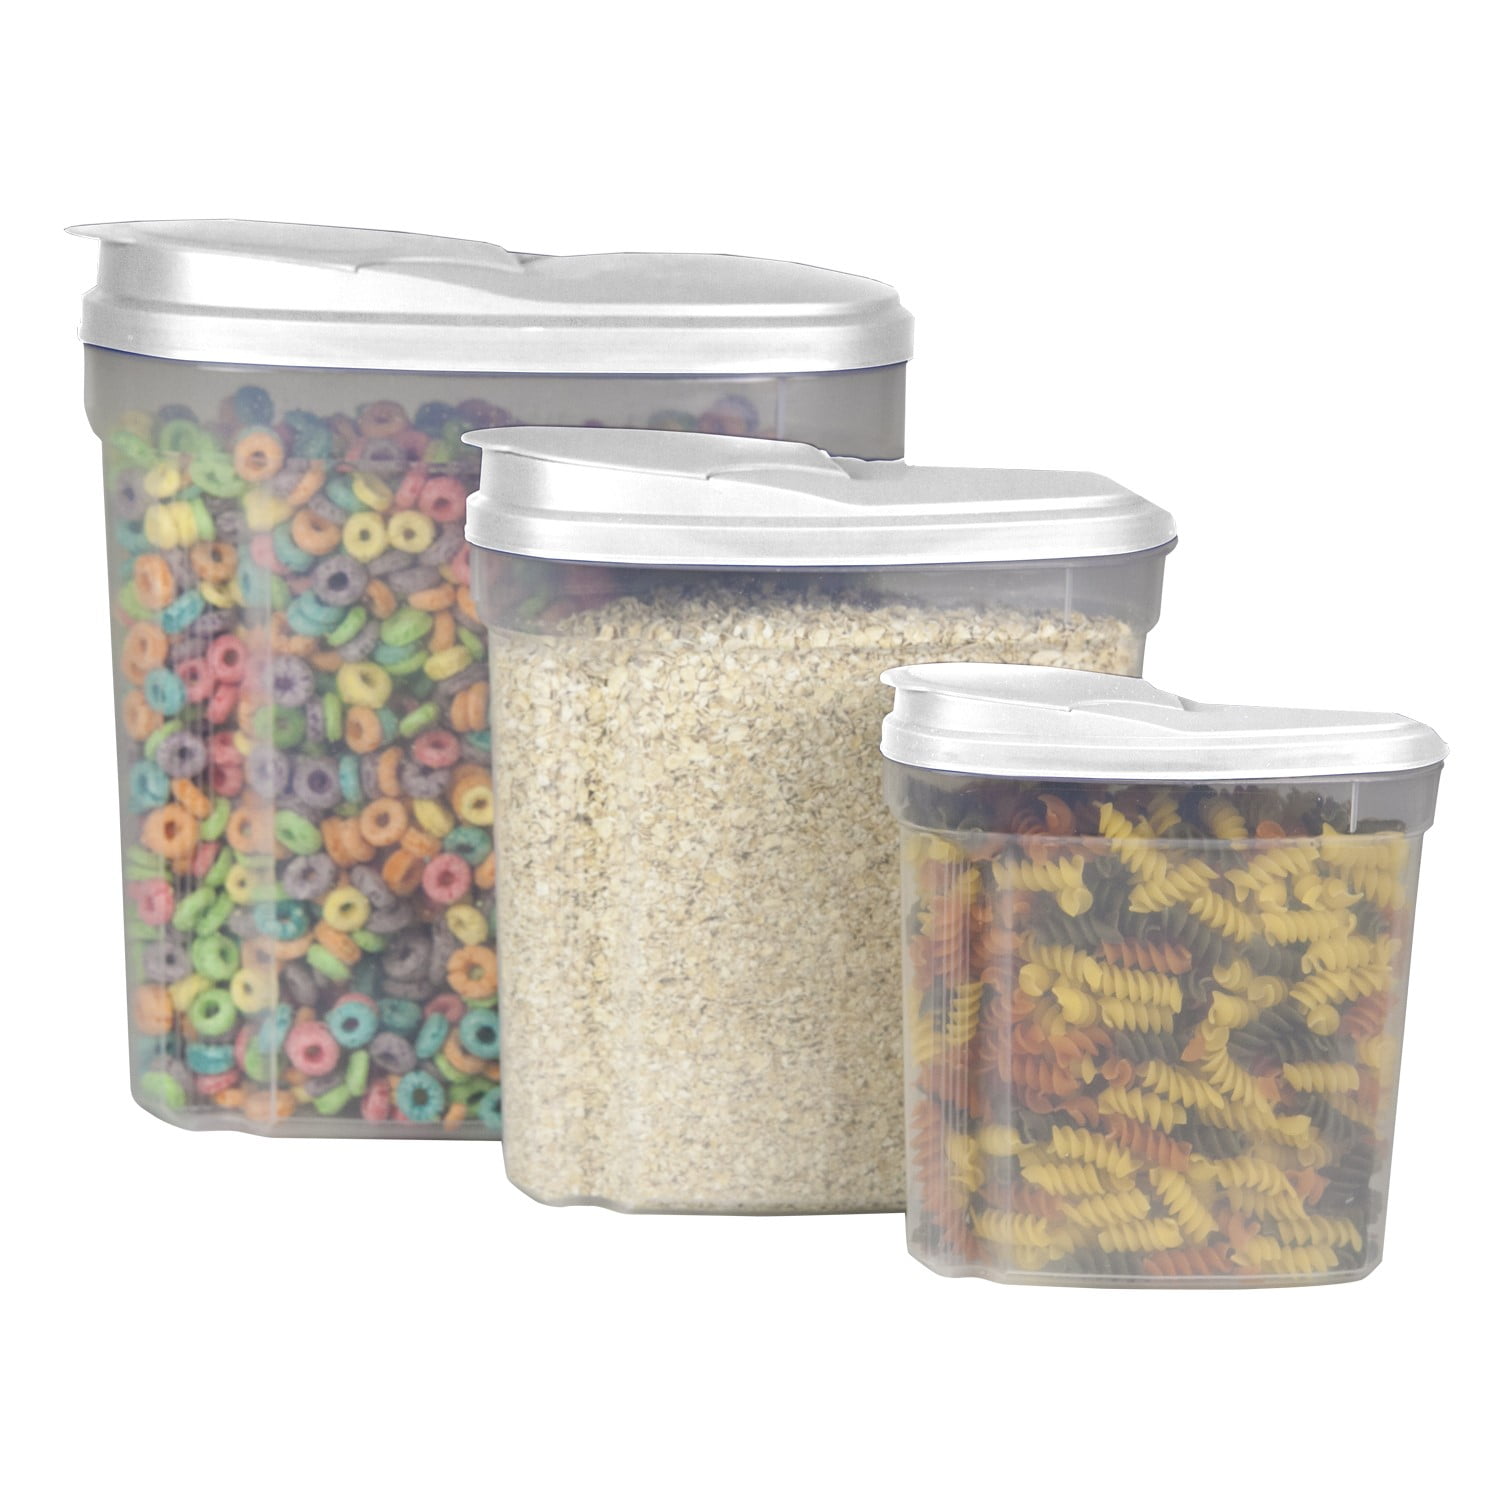 JMH 3 Pcs Air-Tight Storage Containers- Pantry Durable Seal Pot - Cereal  Storage Containers - BPA Free - Clear Containers (760ml, 1150ml, 1500ml) 